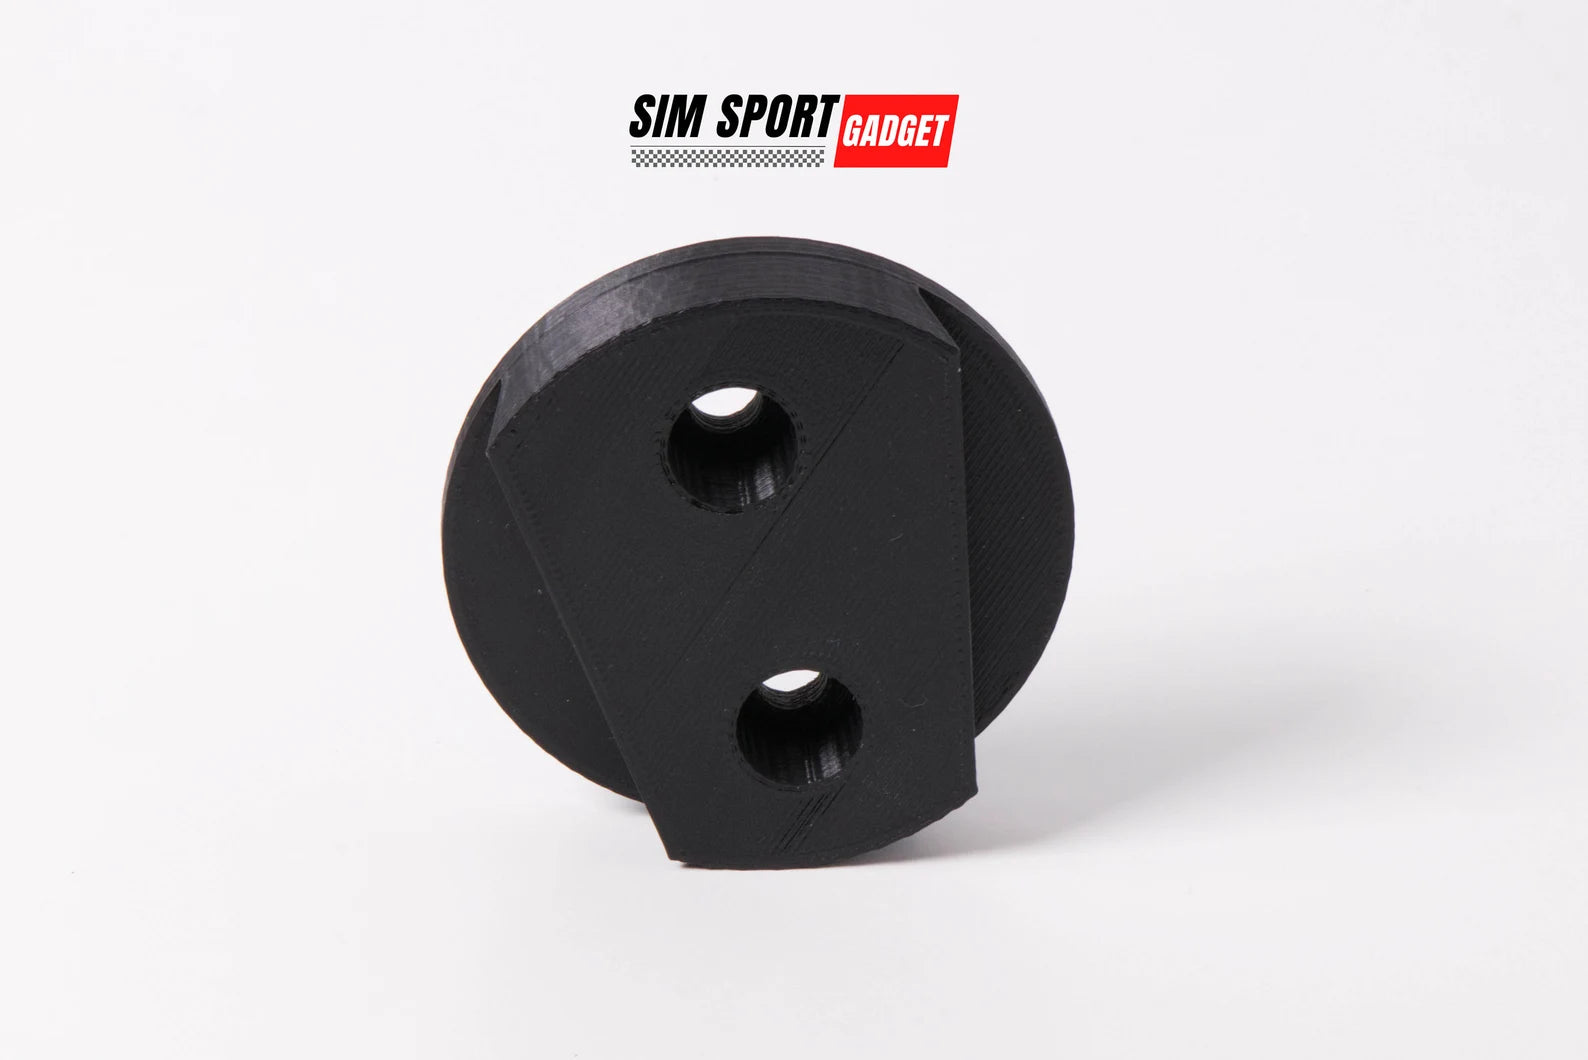 Wall Mount For Simucube Quick Release